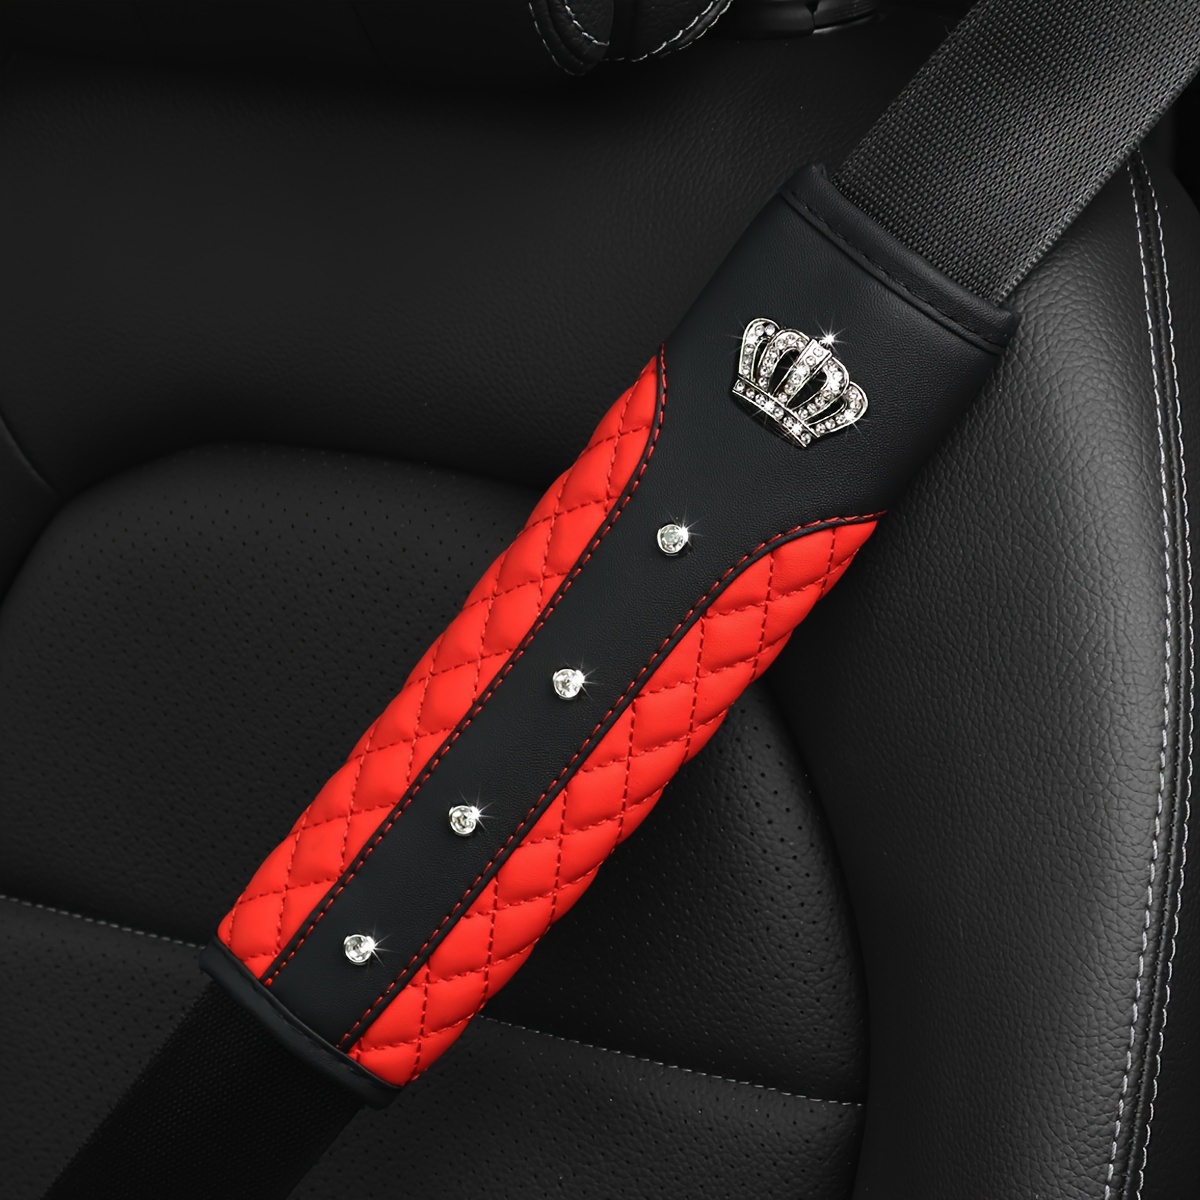 

Luxury Bling Car Seat Belt Cover With Rhinestone Crown, Embroidered Faux Sheepskin, Comfortable Sponge Padding - Fit Leather Car Seat Covers Car Accessories Interior Seat Covers